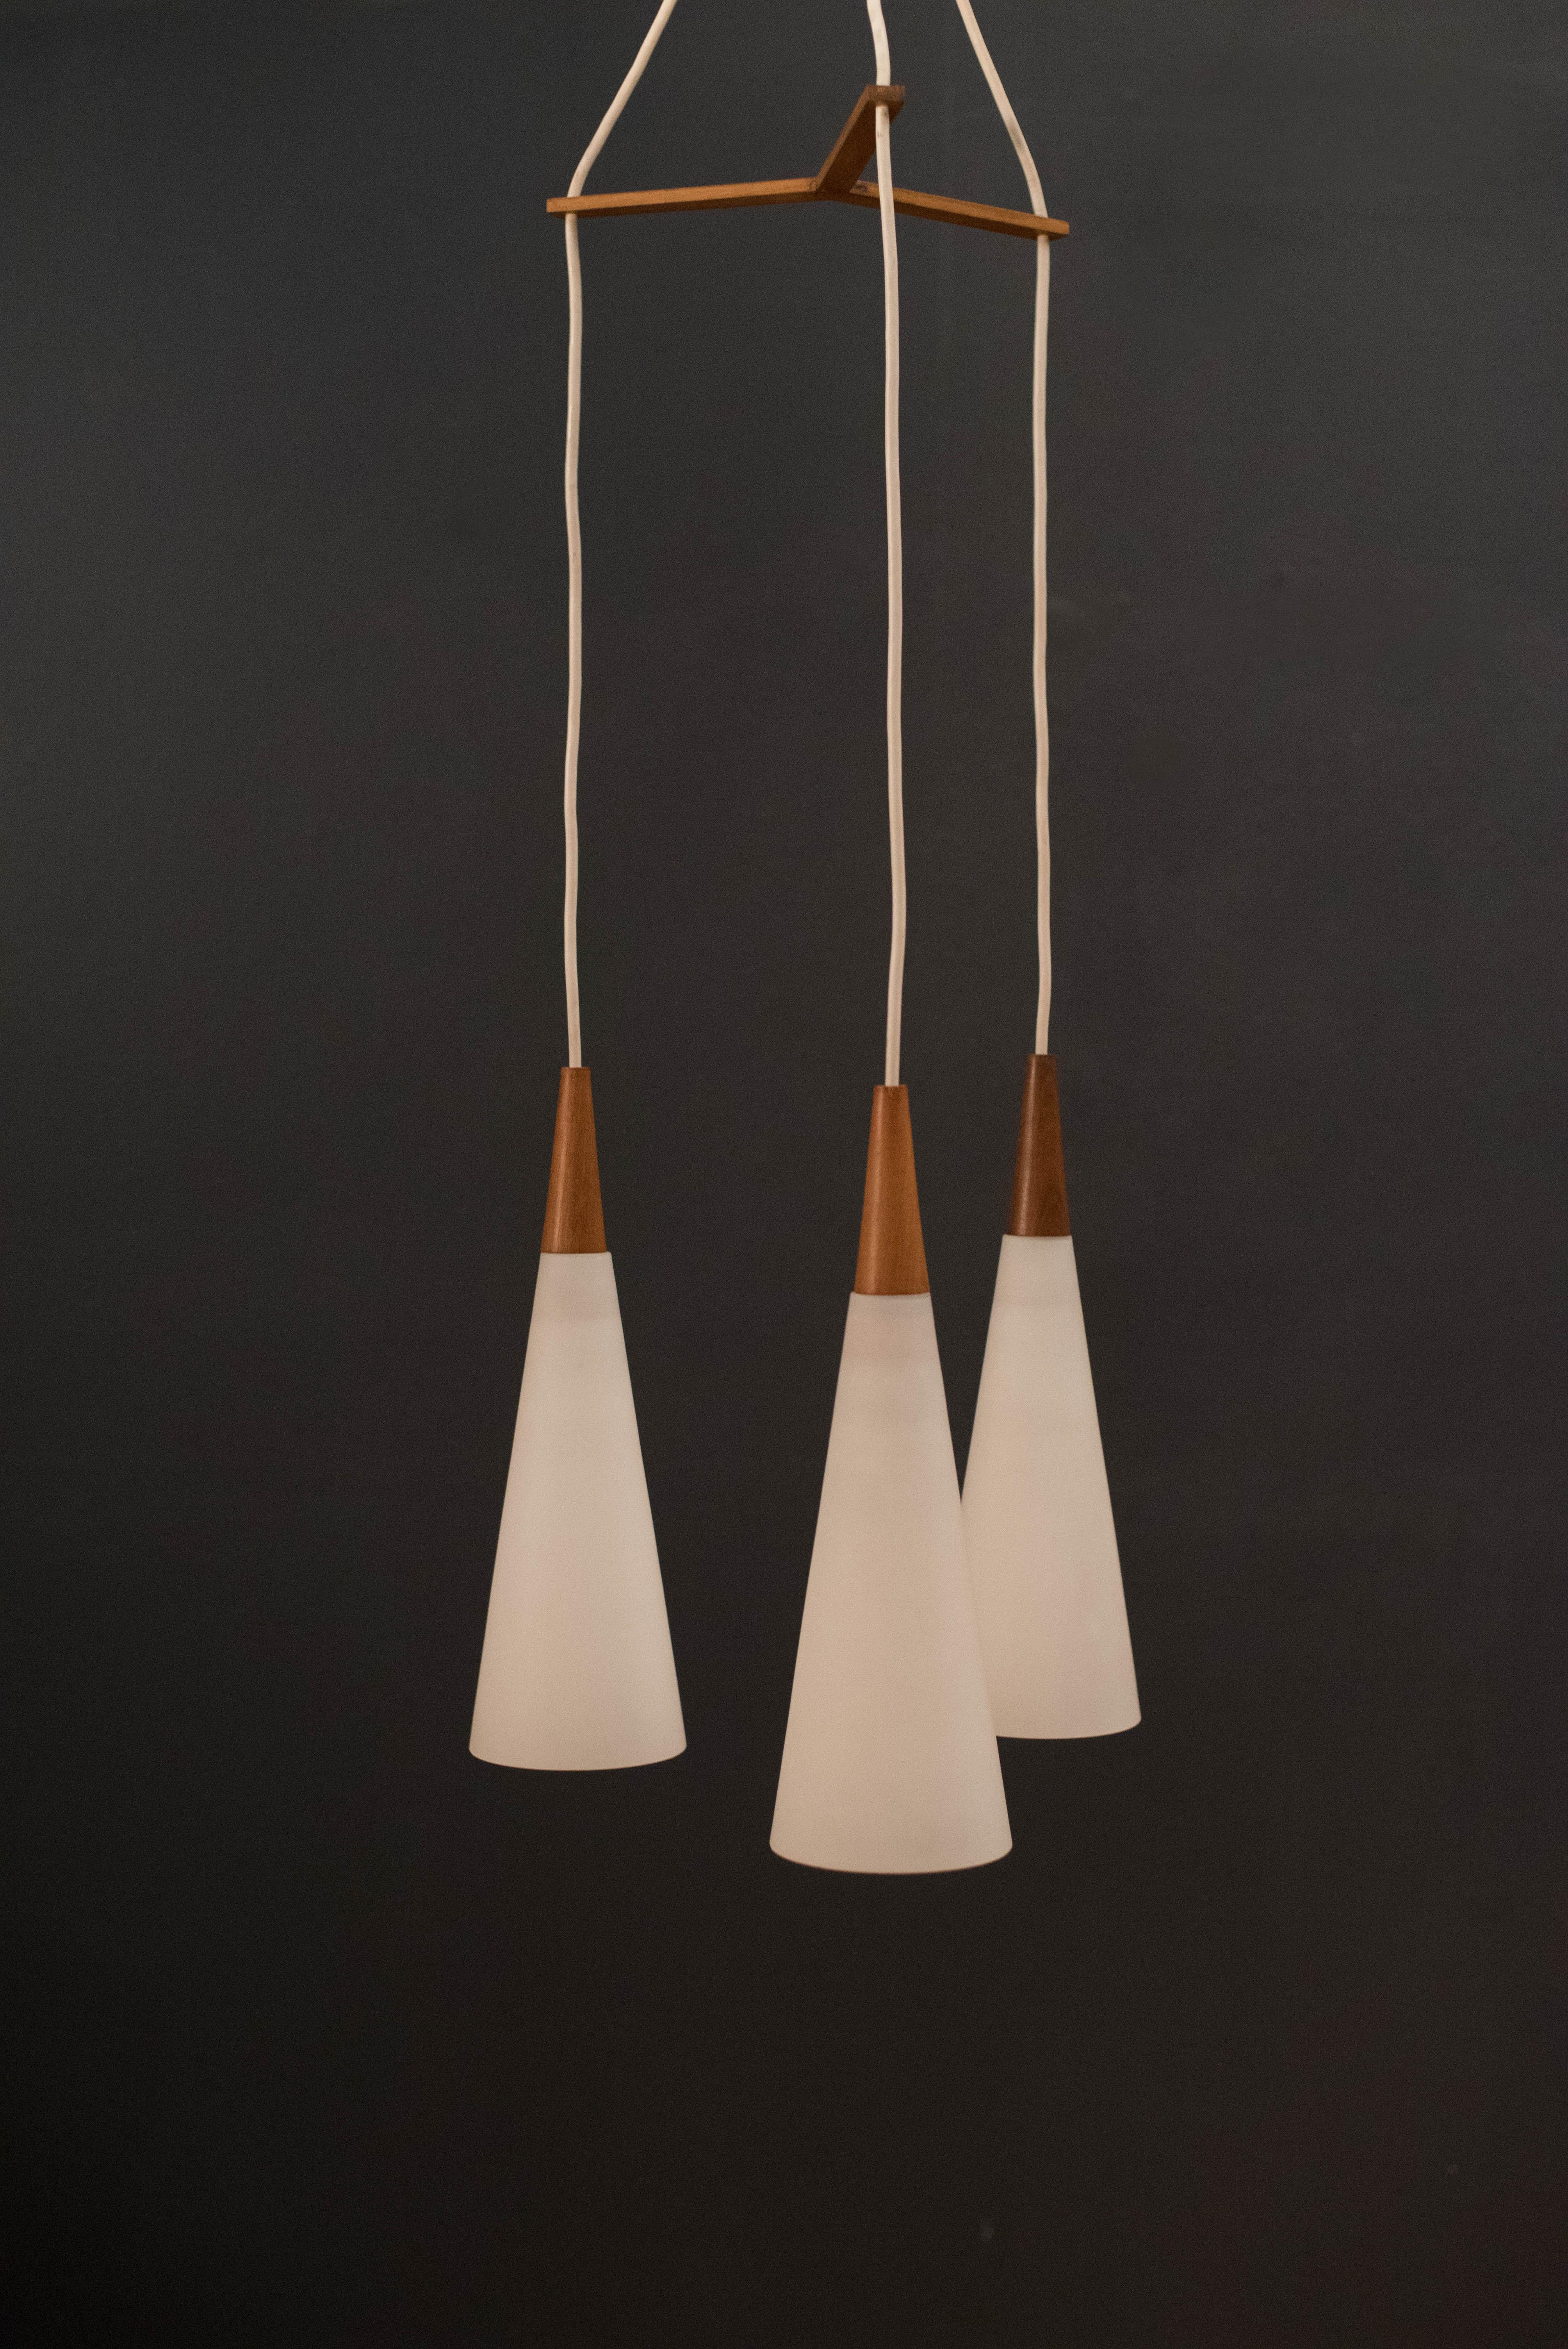 Vintage triple hanging pendant lamp, circa 1960s. This piece includes three frosted glass cone lights with walnut accents. 

Pendant: 5